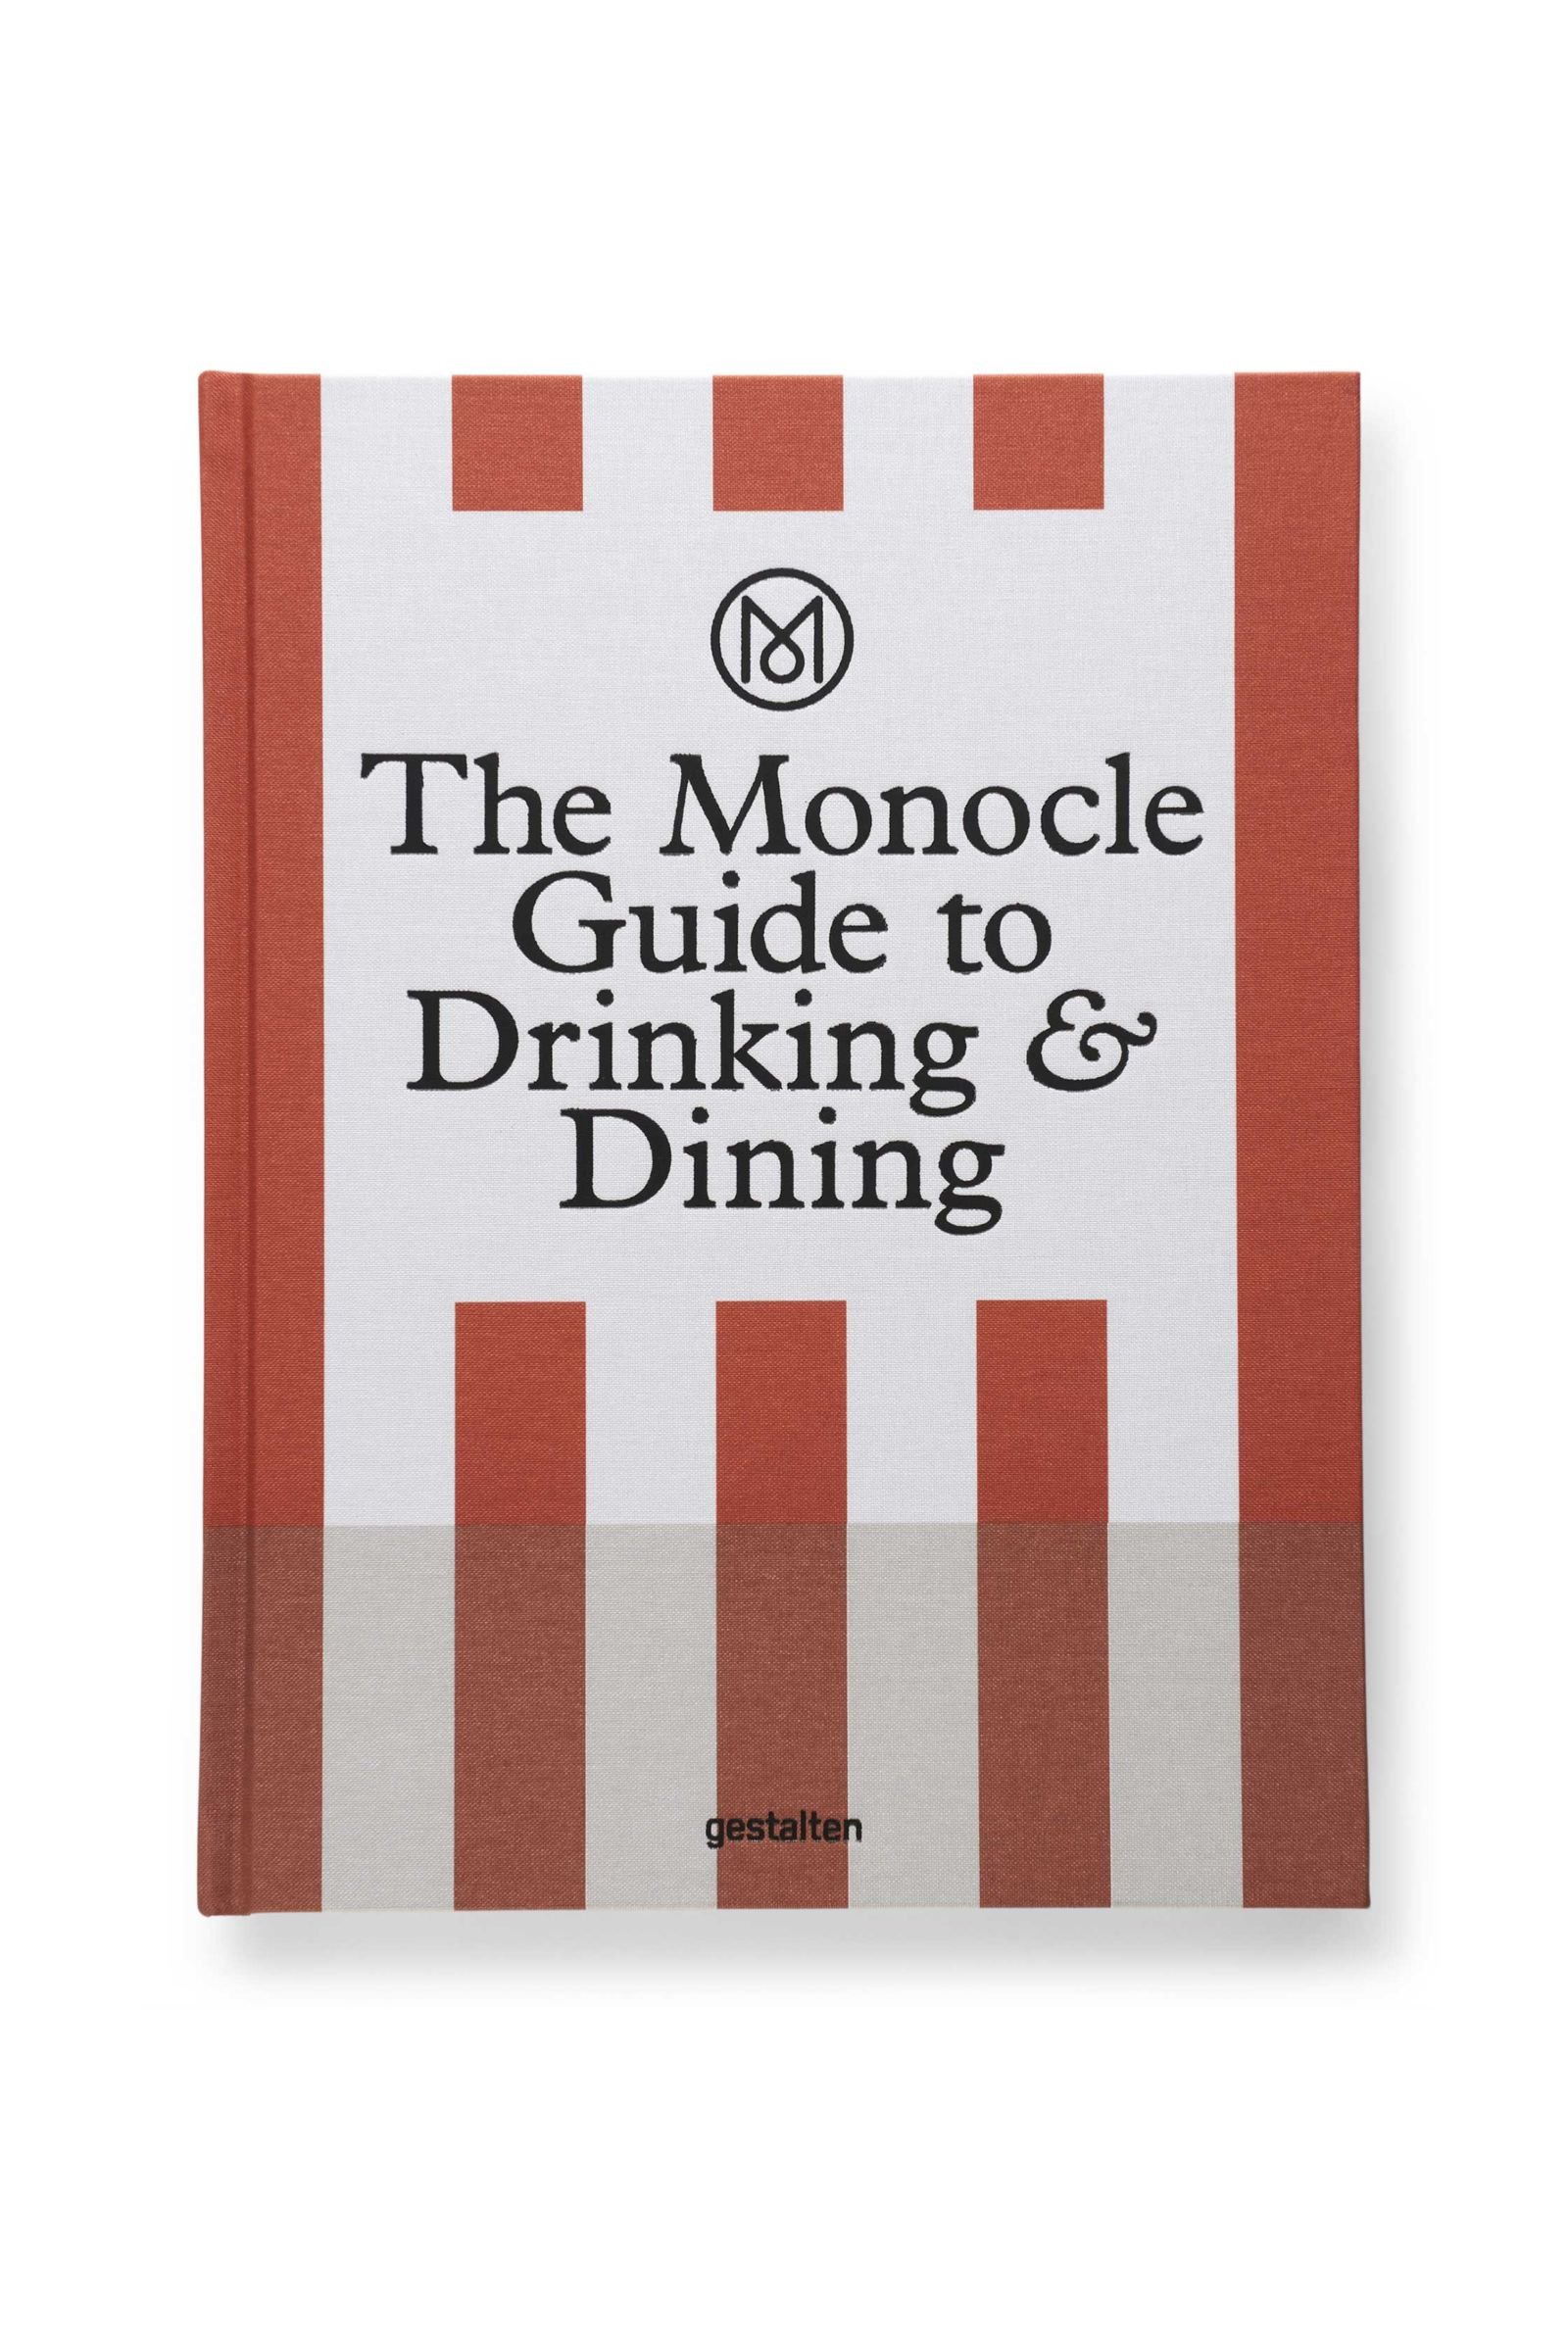 Book 'The Monocle: Guide to Drinking & Dining'